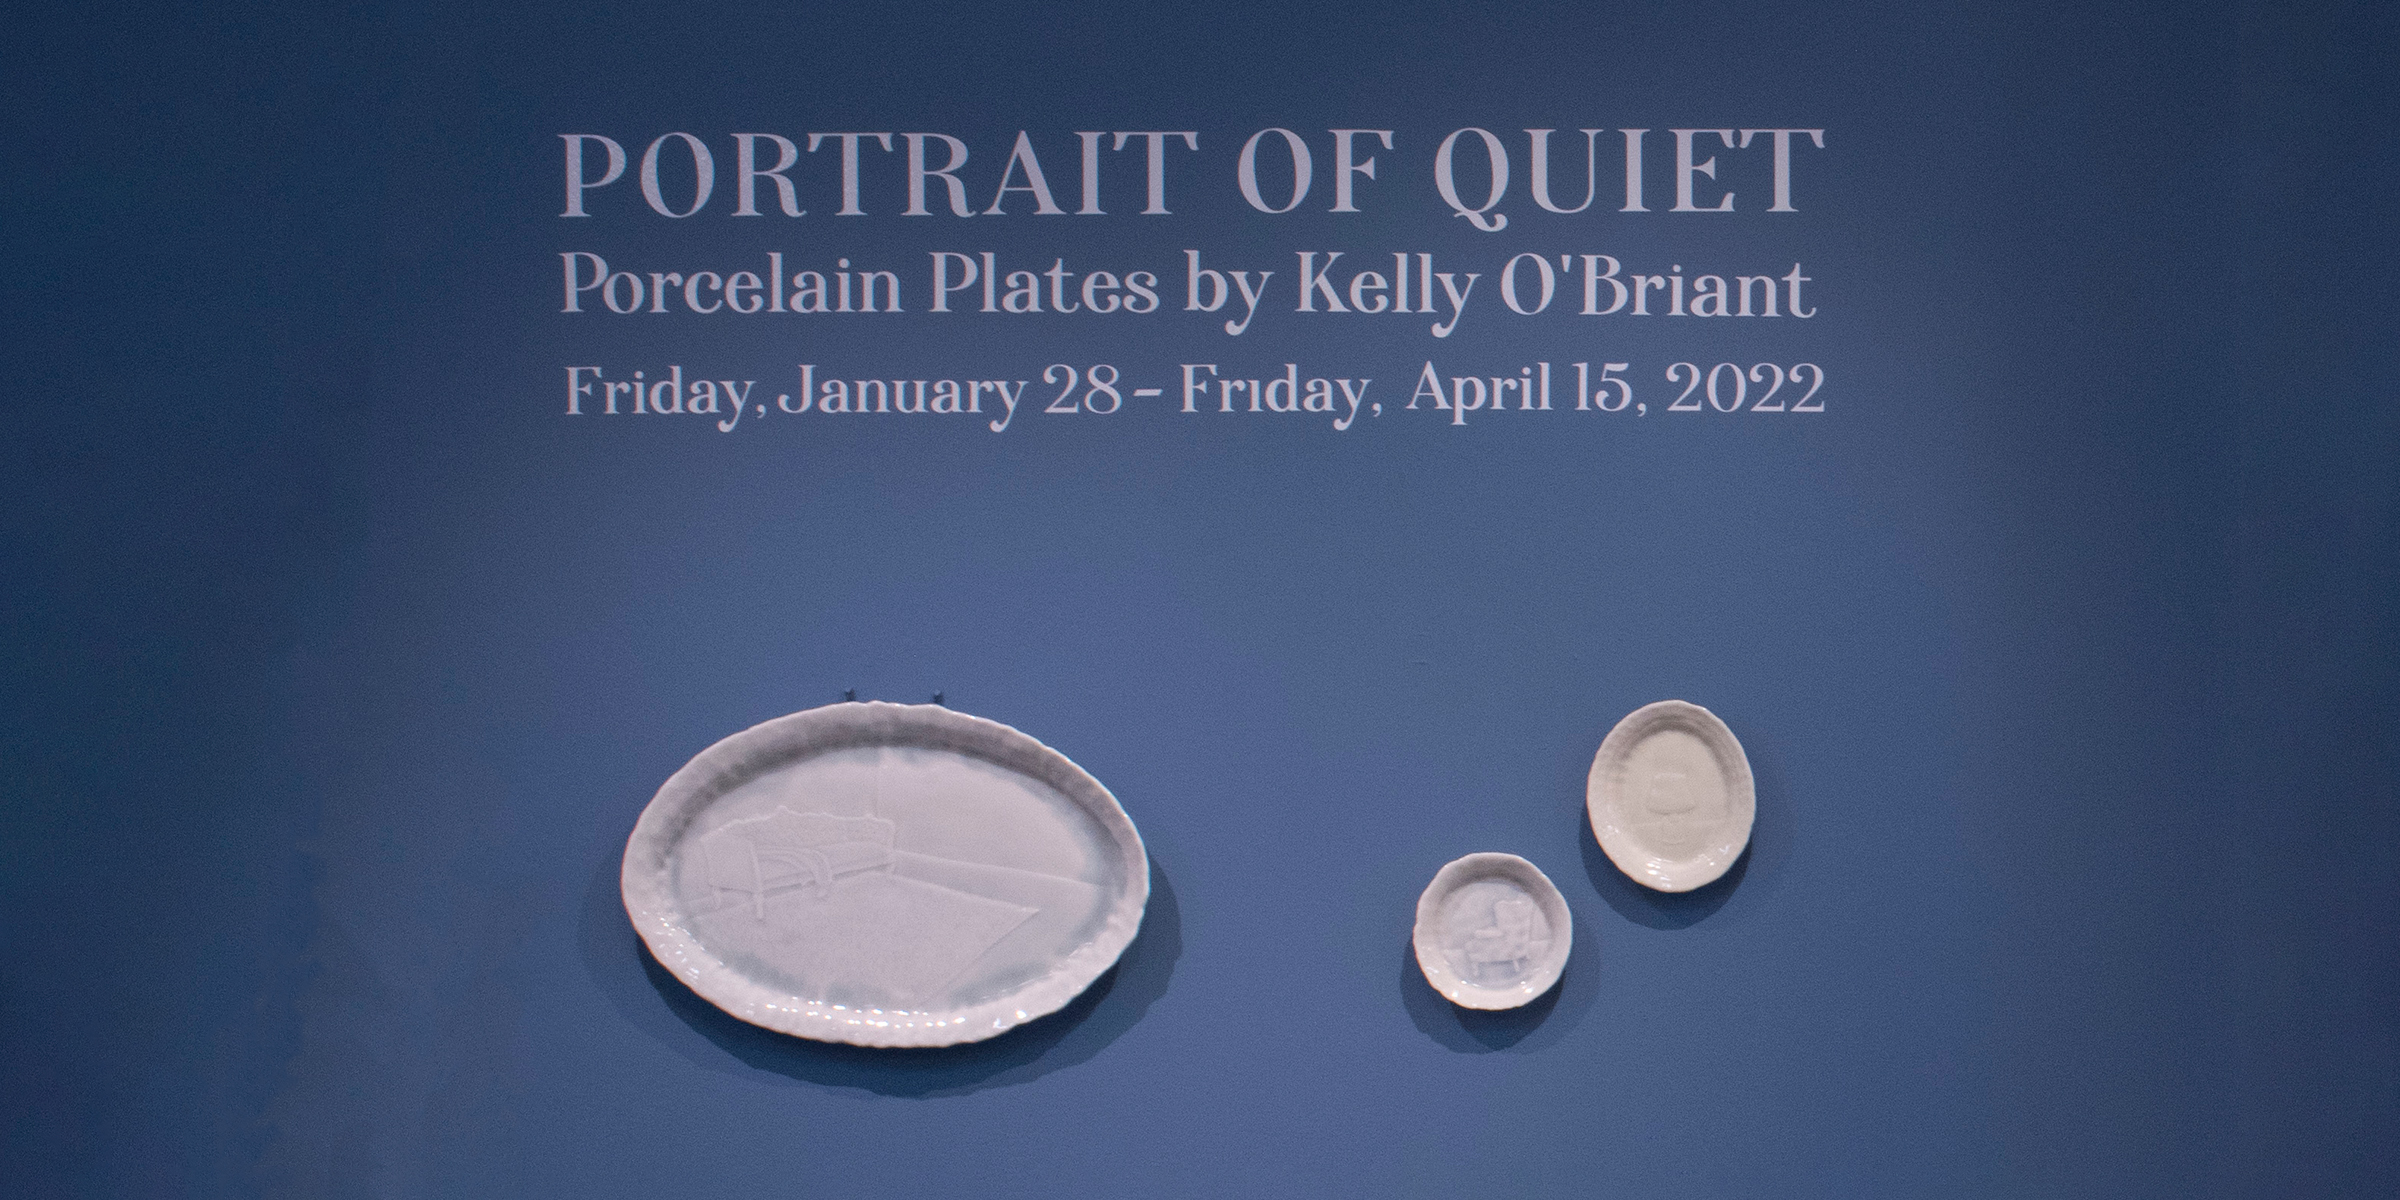 Portrait of Quiet: Porcelain Plates by Kelly O’Briant